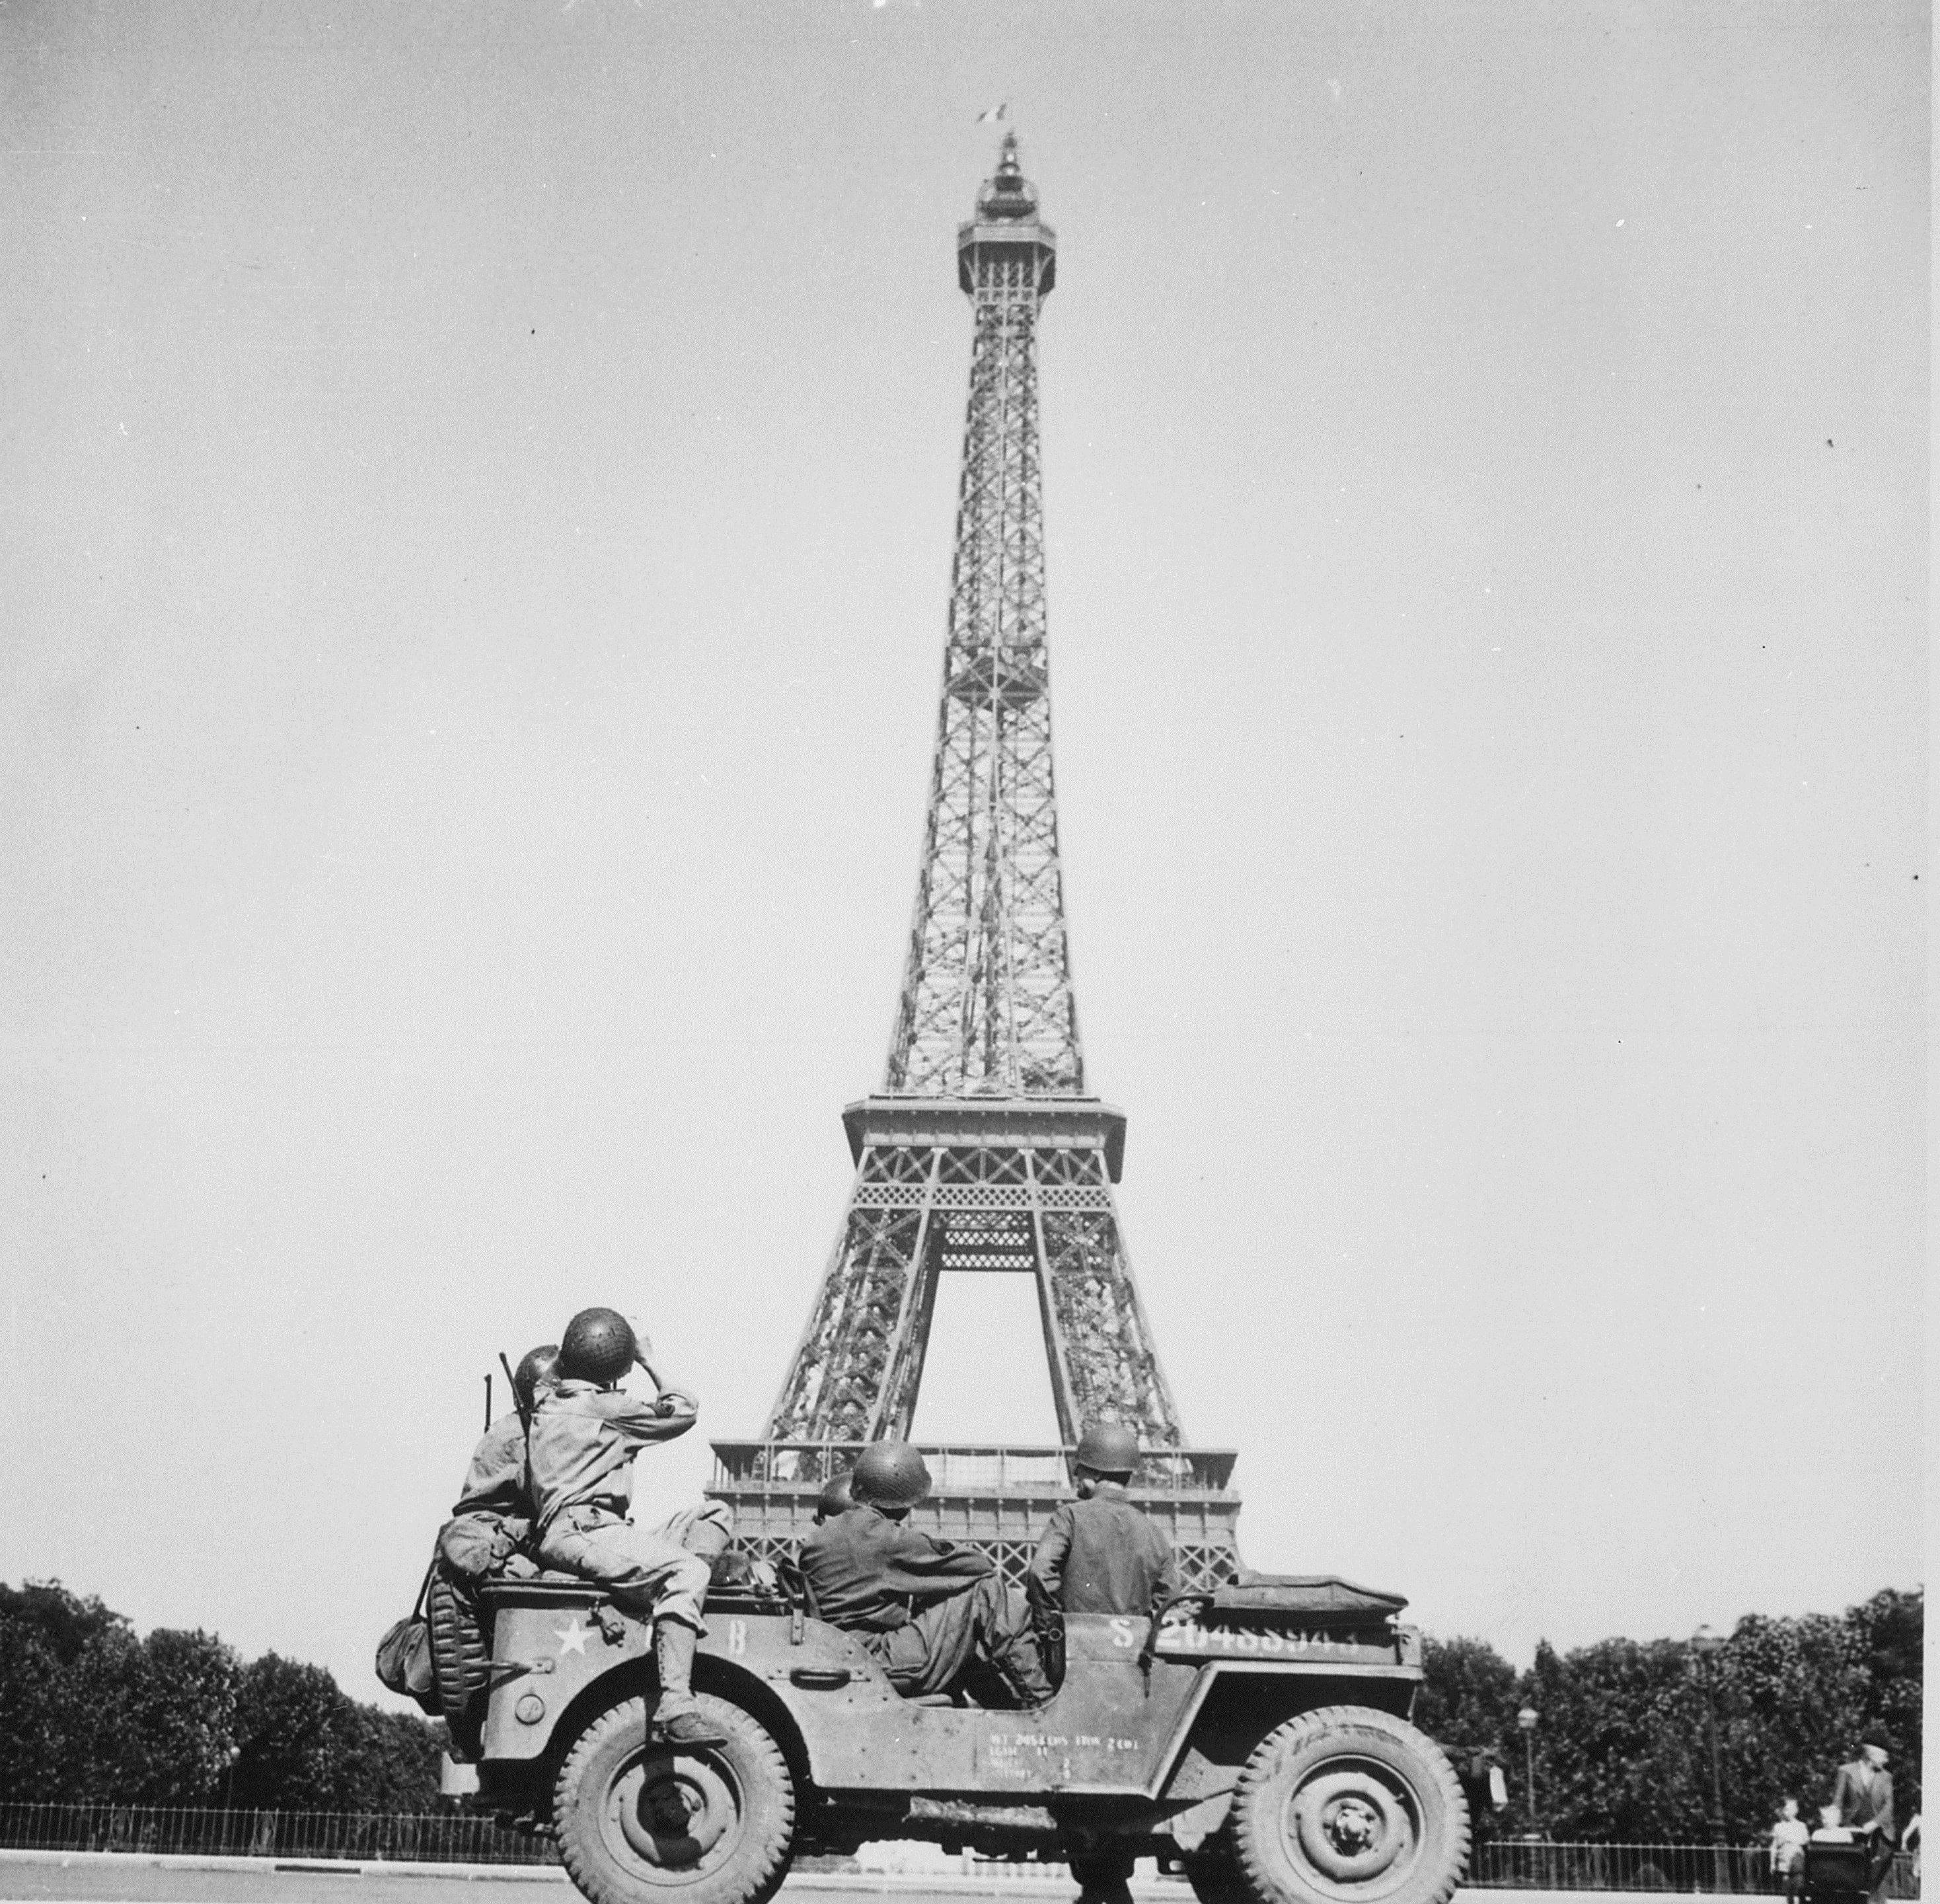 Members of the US Army’s 4th Infantry Division sightseeing in Paris, France, Aug 25, 1944